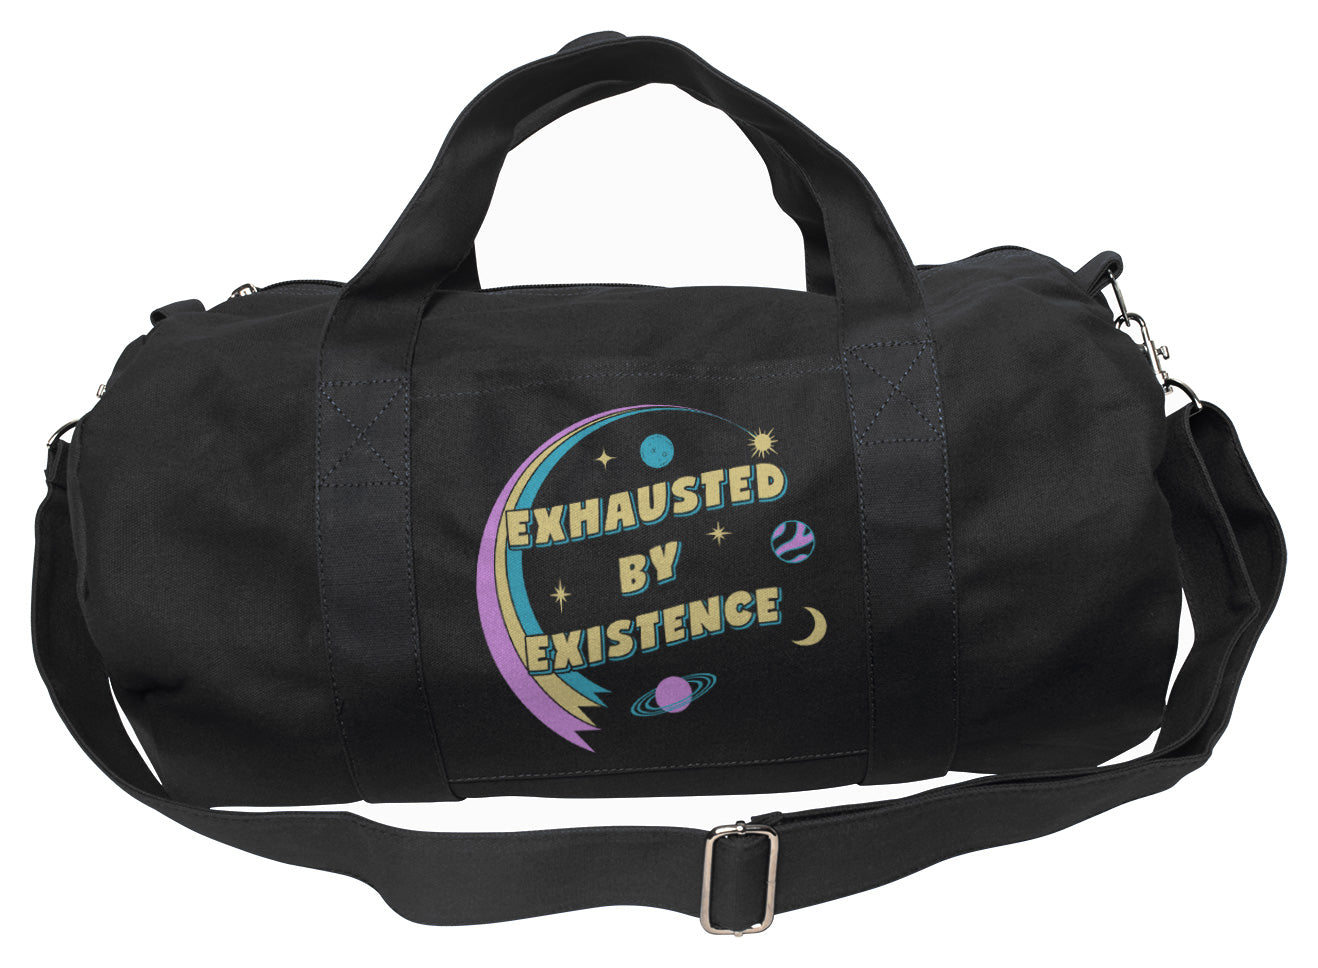 Exhausted By Existence Duffel Bag